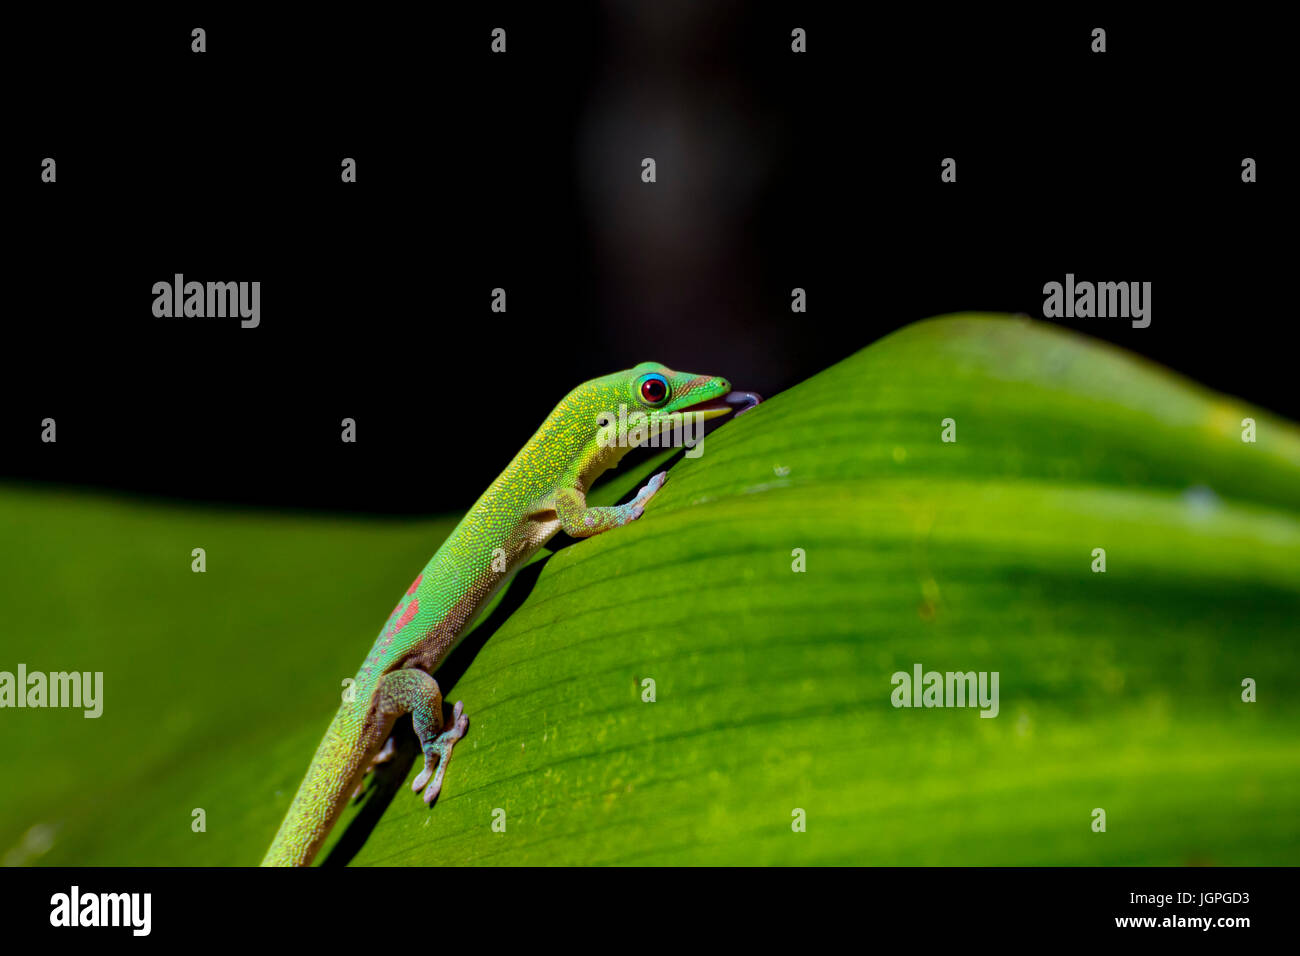 Gold Dust Day Gecko licking dew drops from a leaf, Hawaii Stock Photo